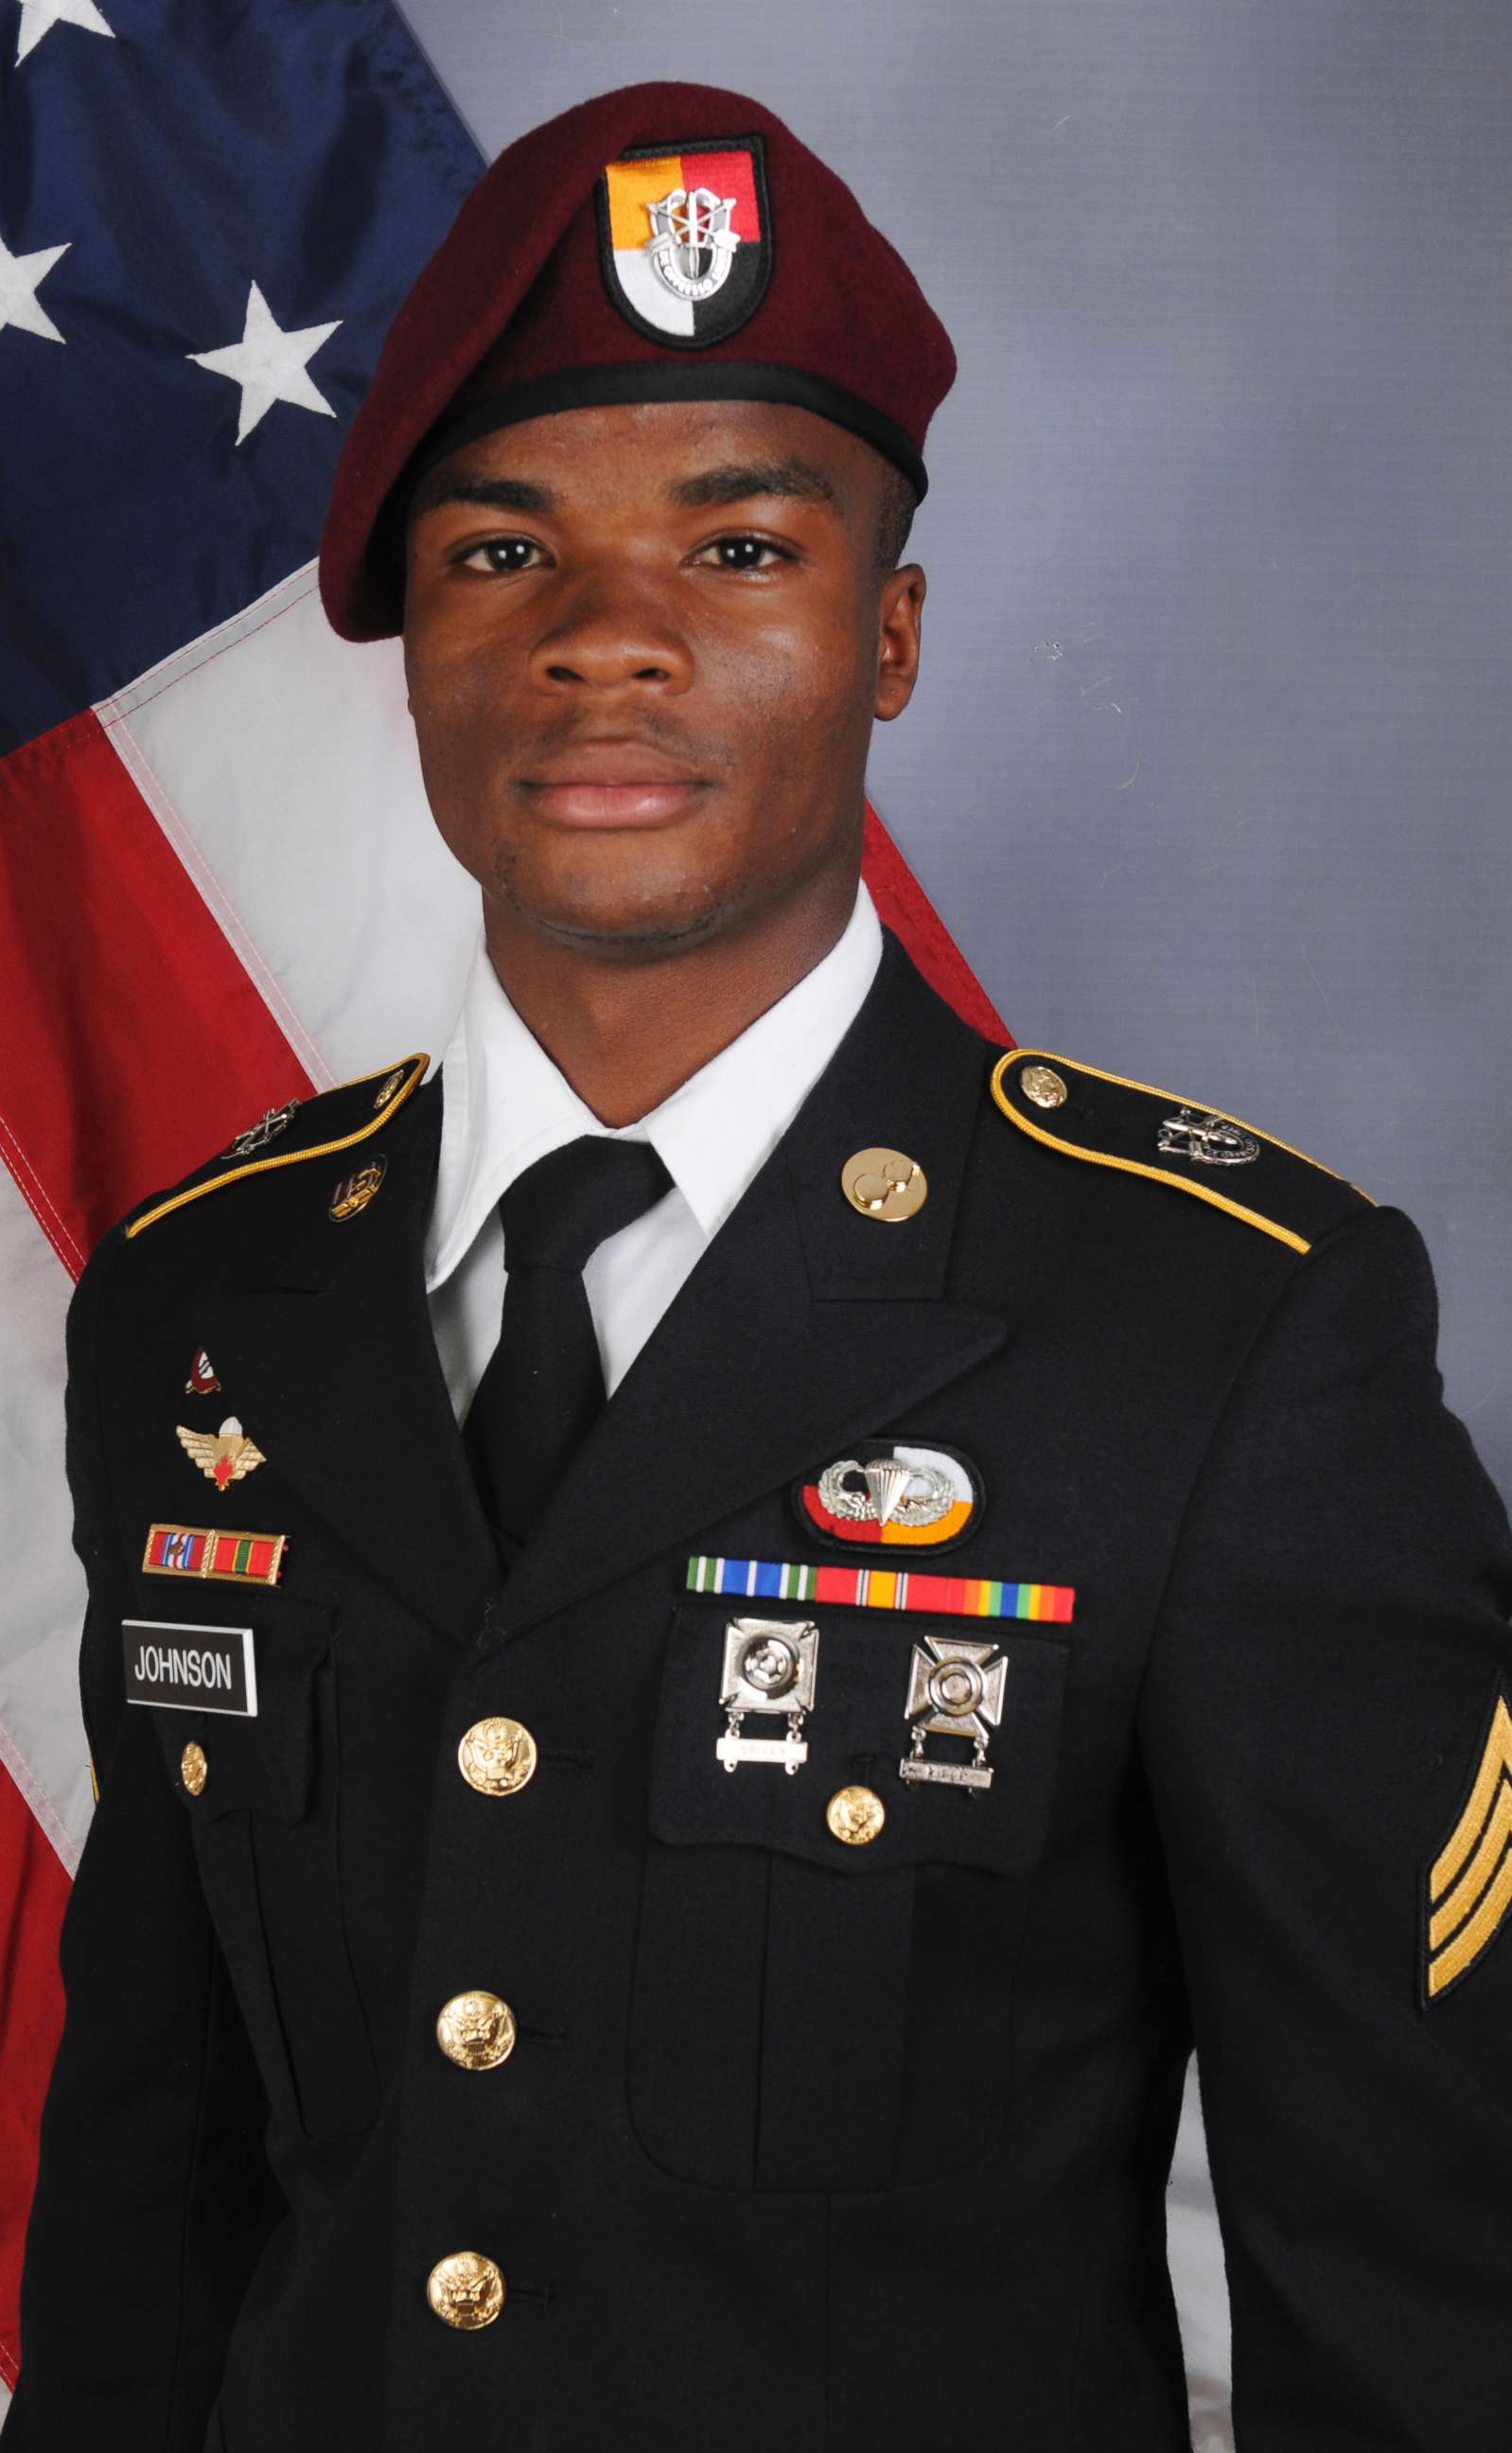 PHOTO: This file photo provided by the U.S. Army Special Operations Command shows Sgt. La David Johnson, who was killed in an Oct. 4, 2017 ambush in Niger. 